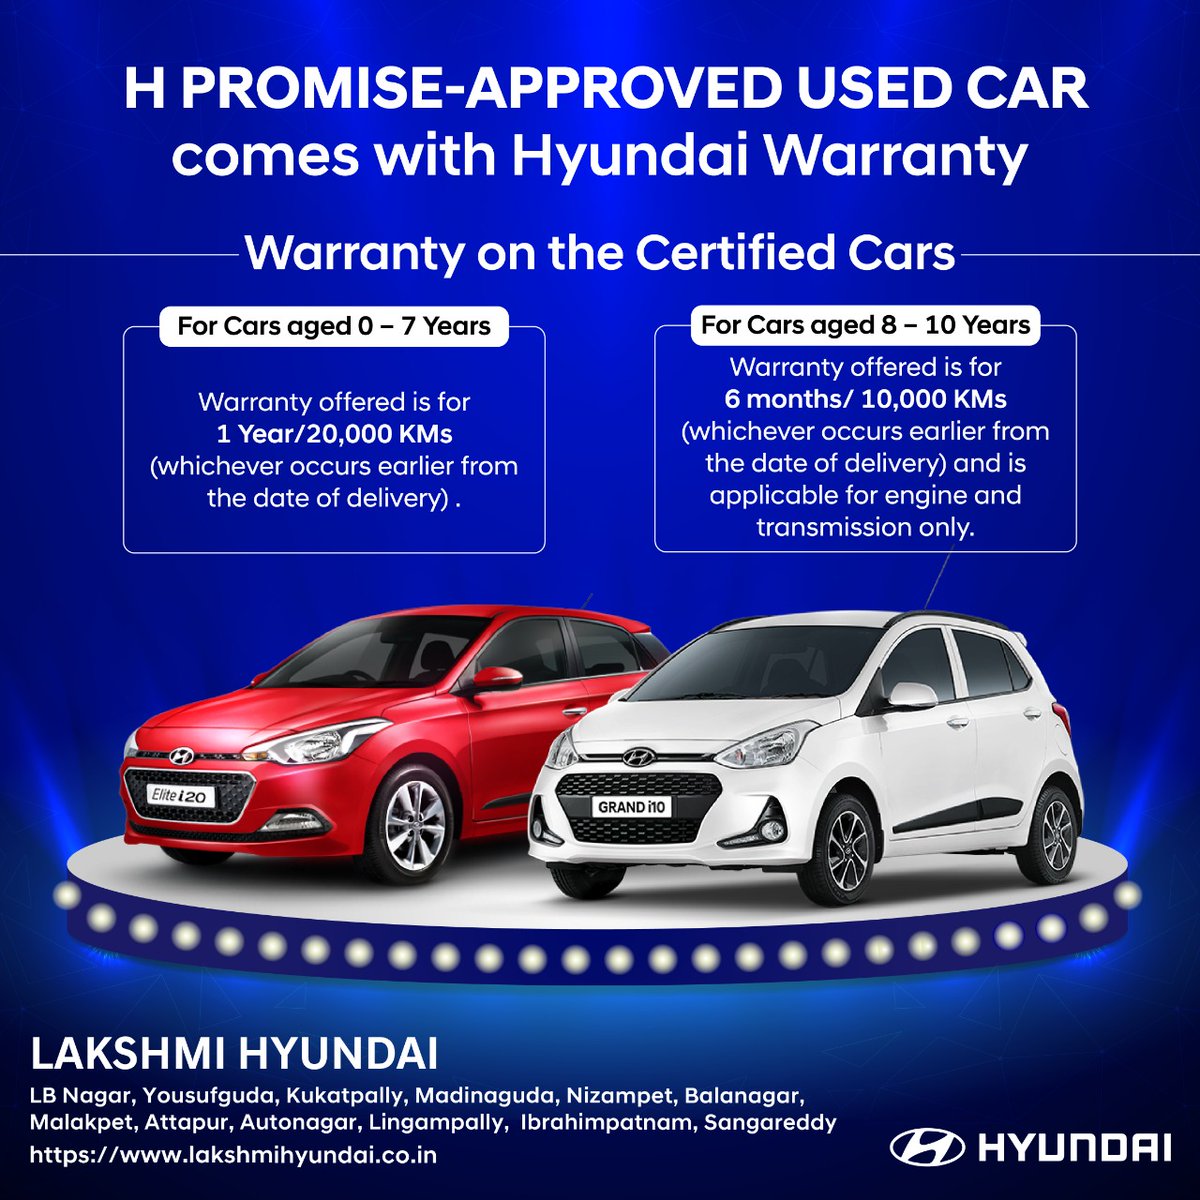 Give wings to your dreams!
Upgrade your existing car with a certified pre-owned car from Hyundai H-Promise.

To know more, visit our showroom today!

#LakshmiHyundai #Hyundai #HyundaiIndia #HyundaiCars #BuyHyundaiCar #HPromise #PreOwnedcars #certifiedpreownedcar #LakshmiHyundai